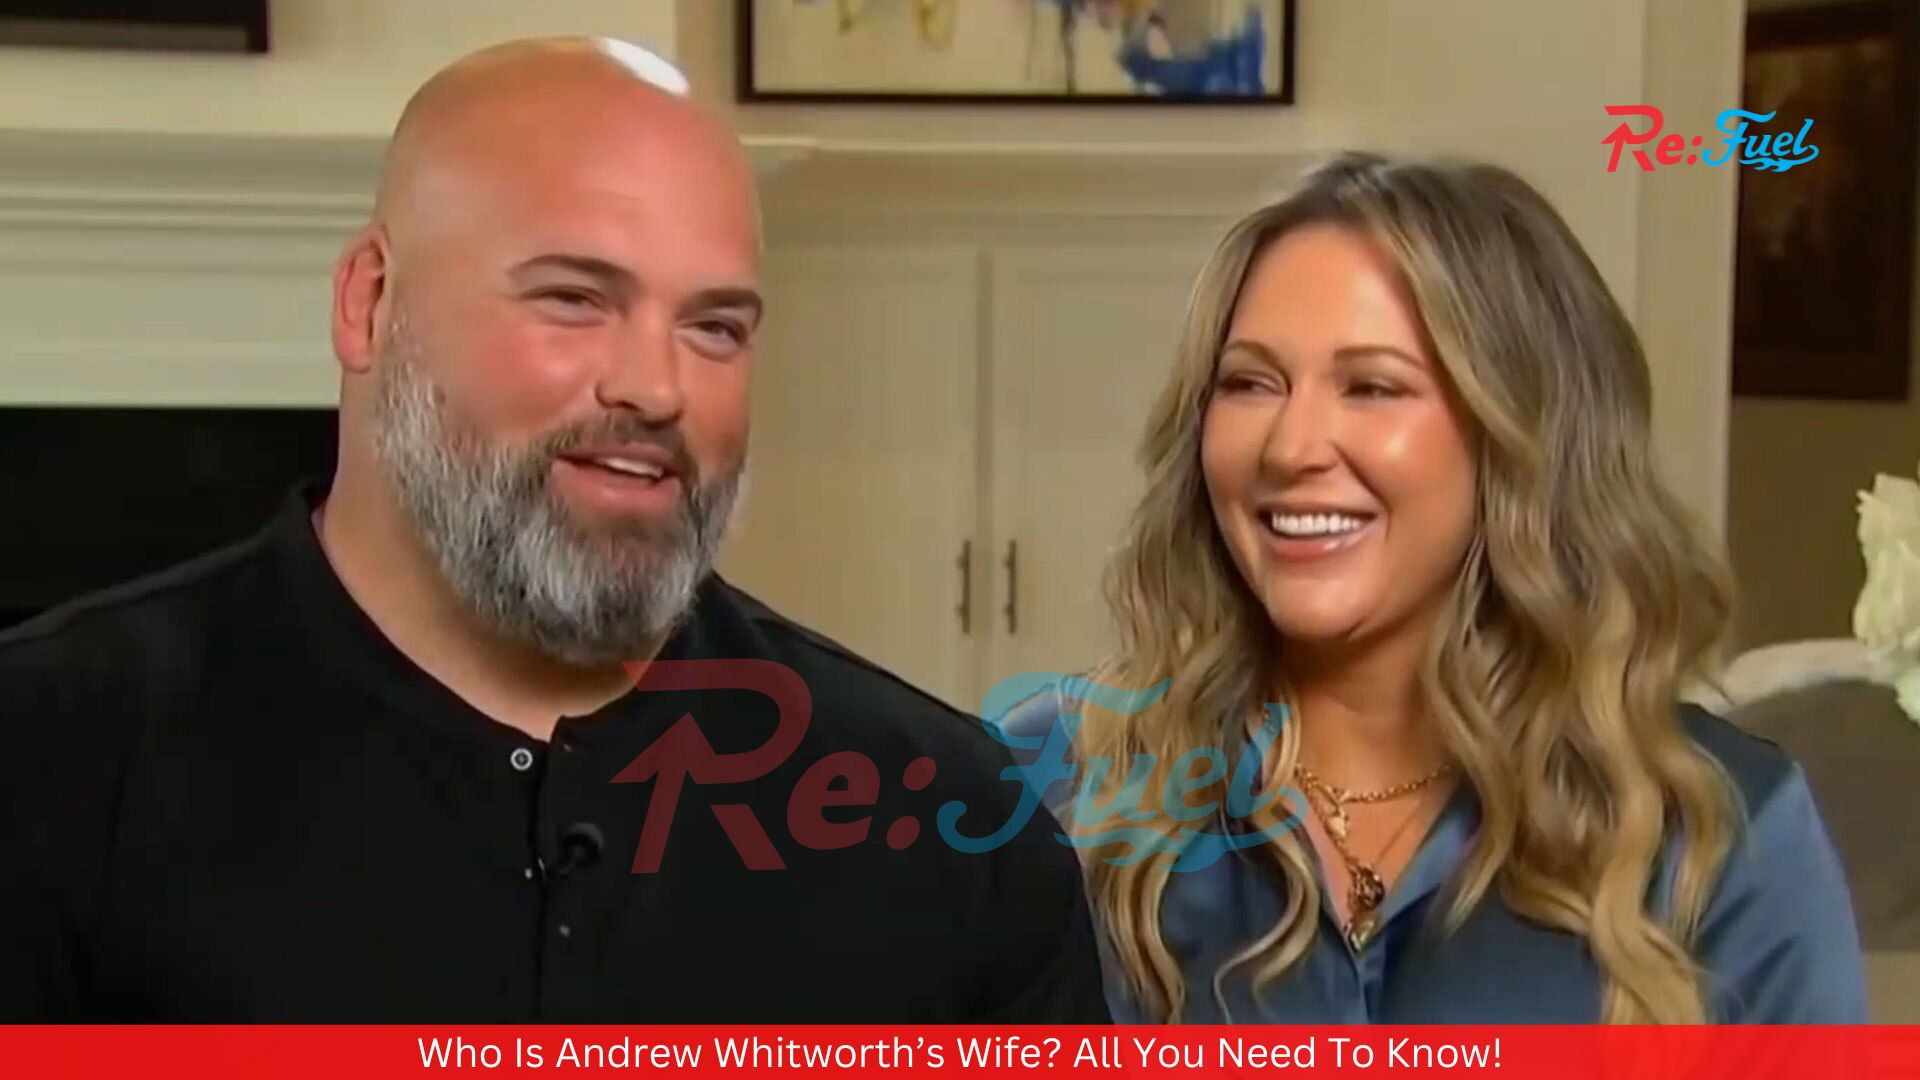 Who Is Andrew Whitworth’s Wife? All You Need To Know!